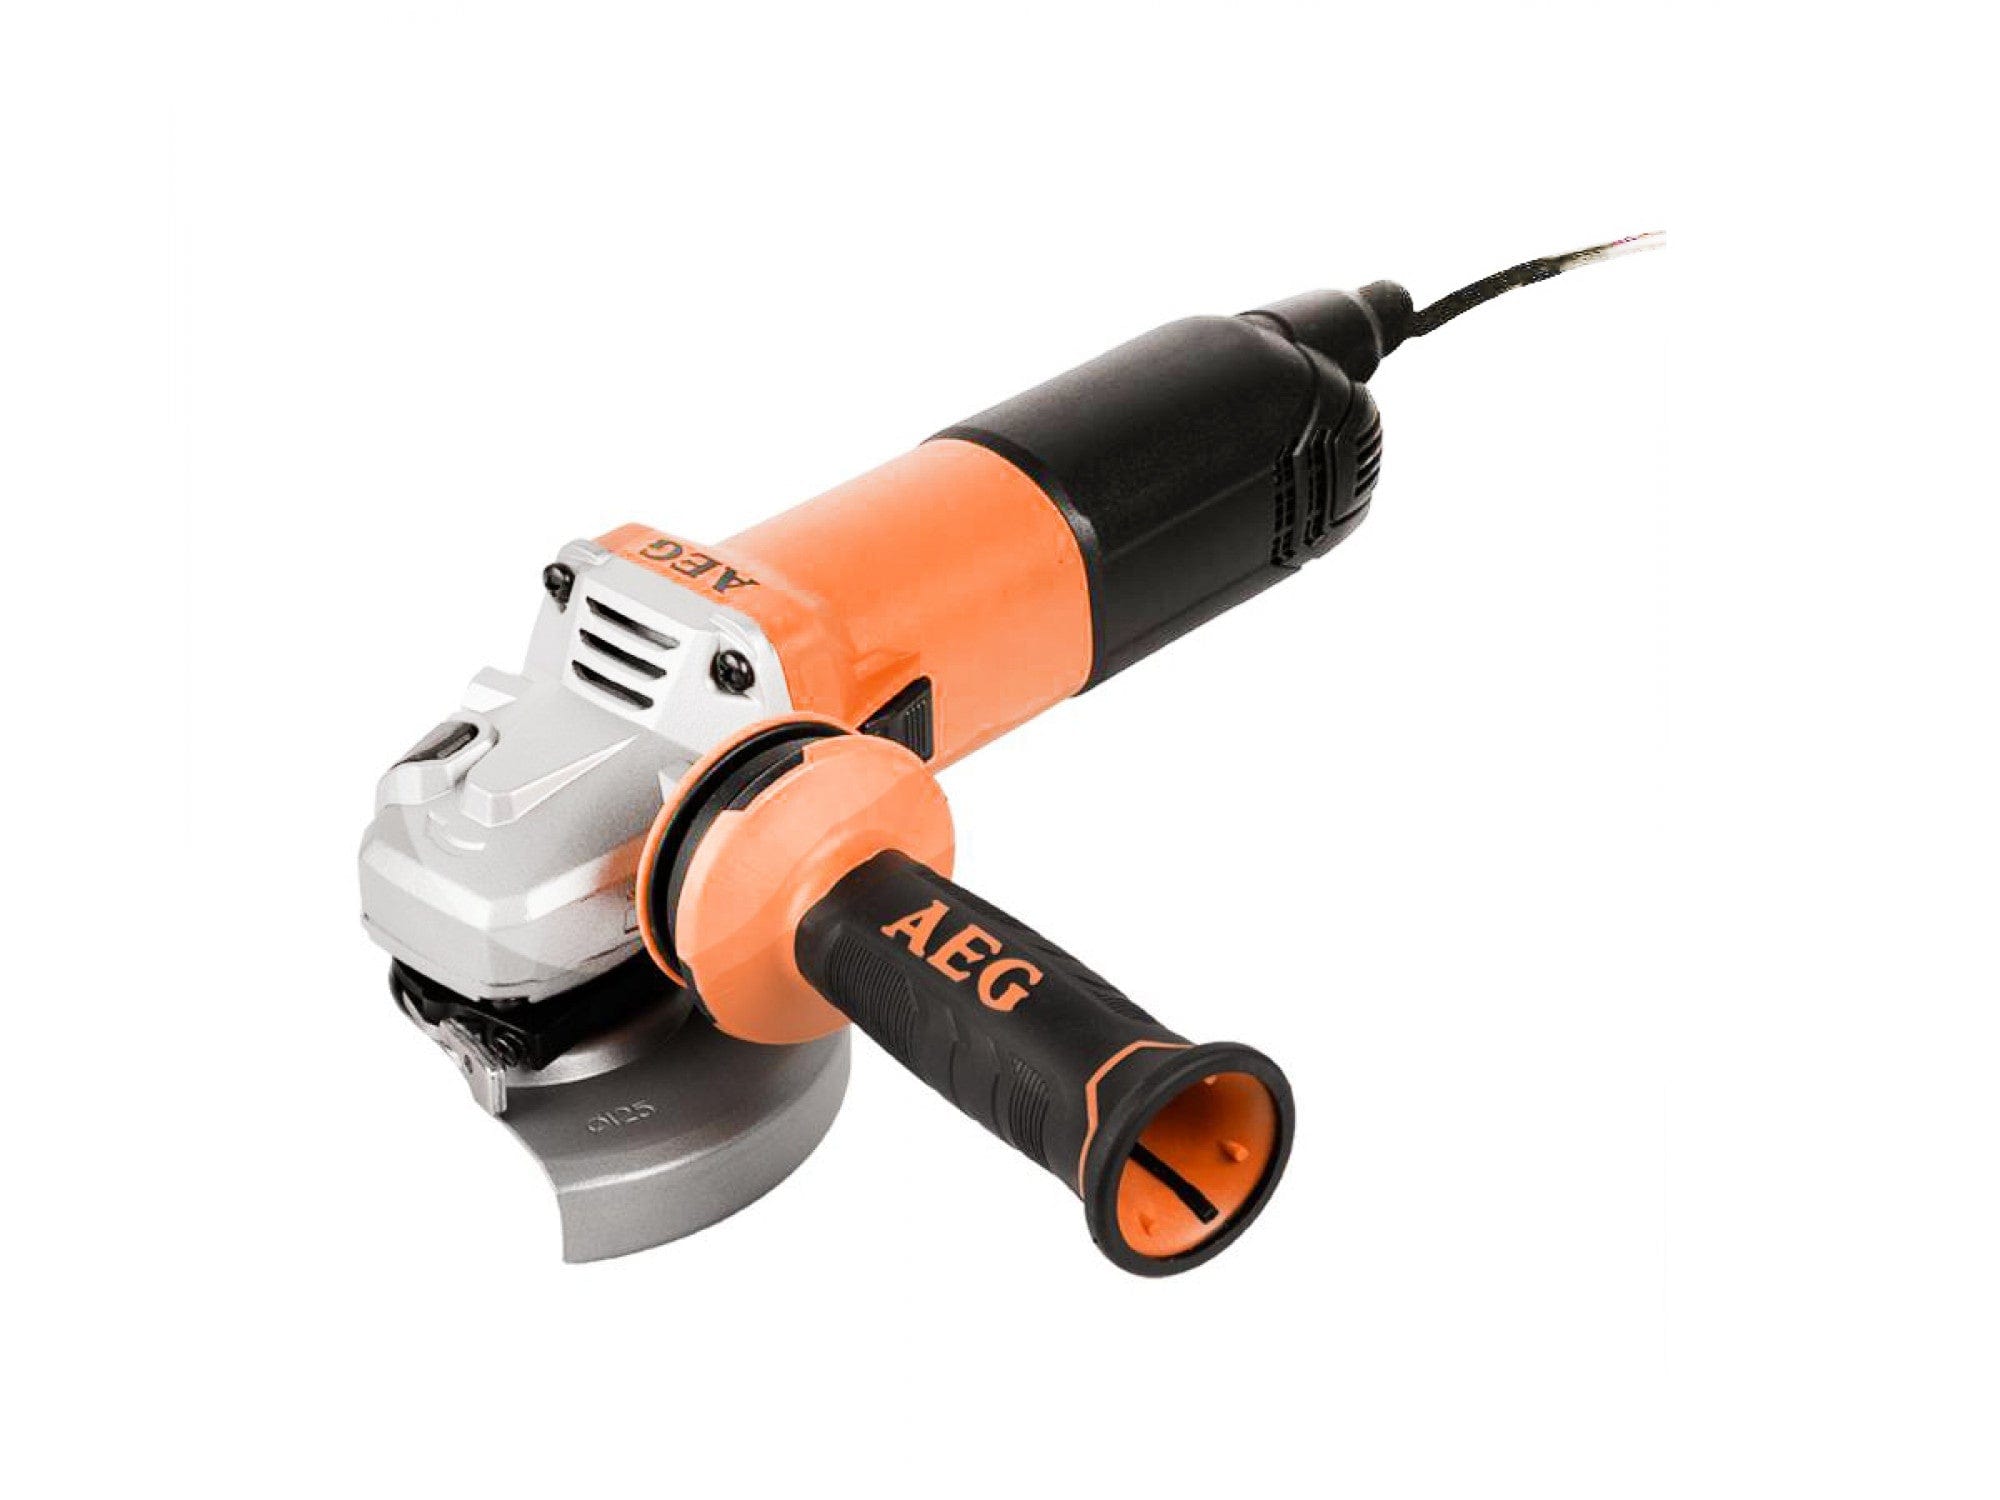 AEG 4.5"/115mm Angle Grinder 1200W - WS12-115 | Supply Master | Accra, Ghana Grinder Buy Tools hardware Building materials